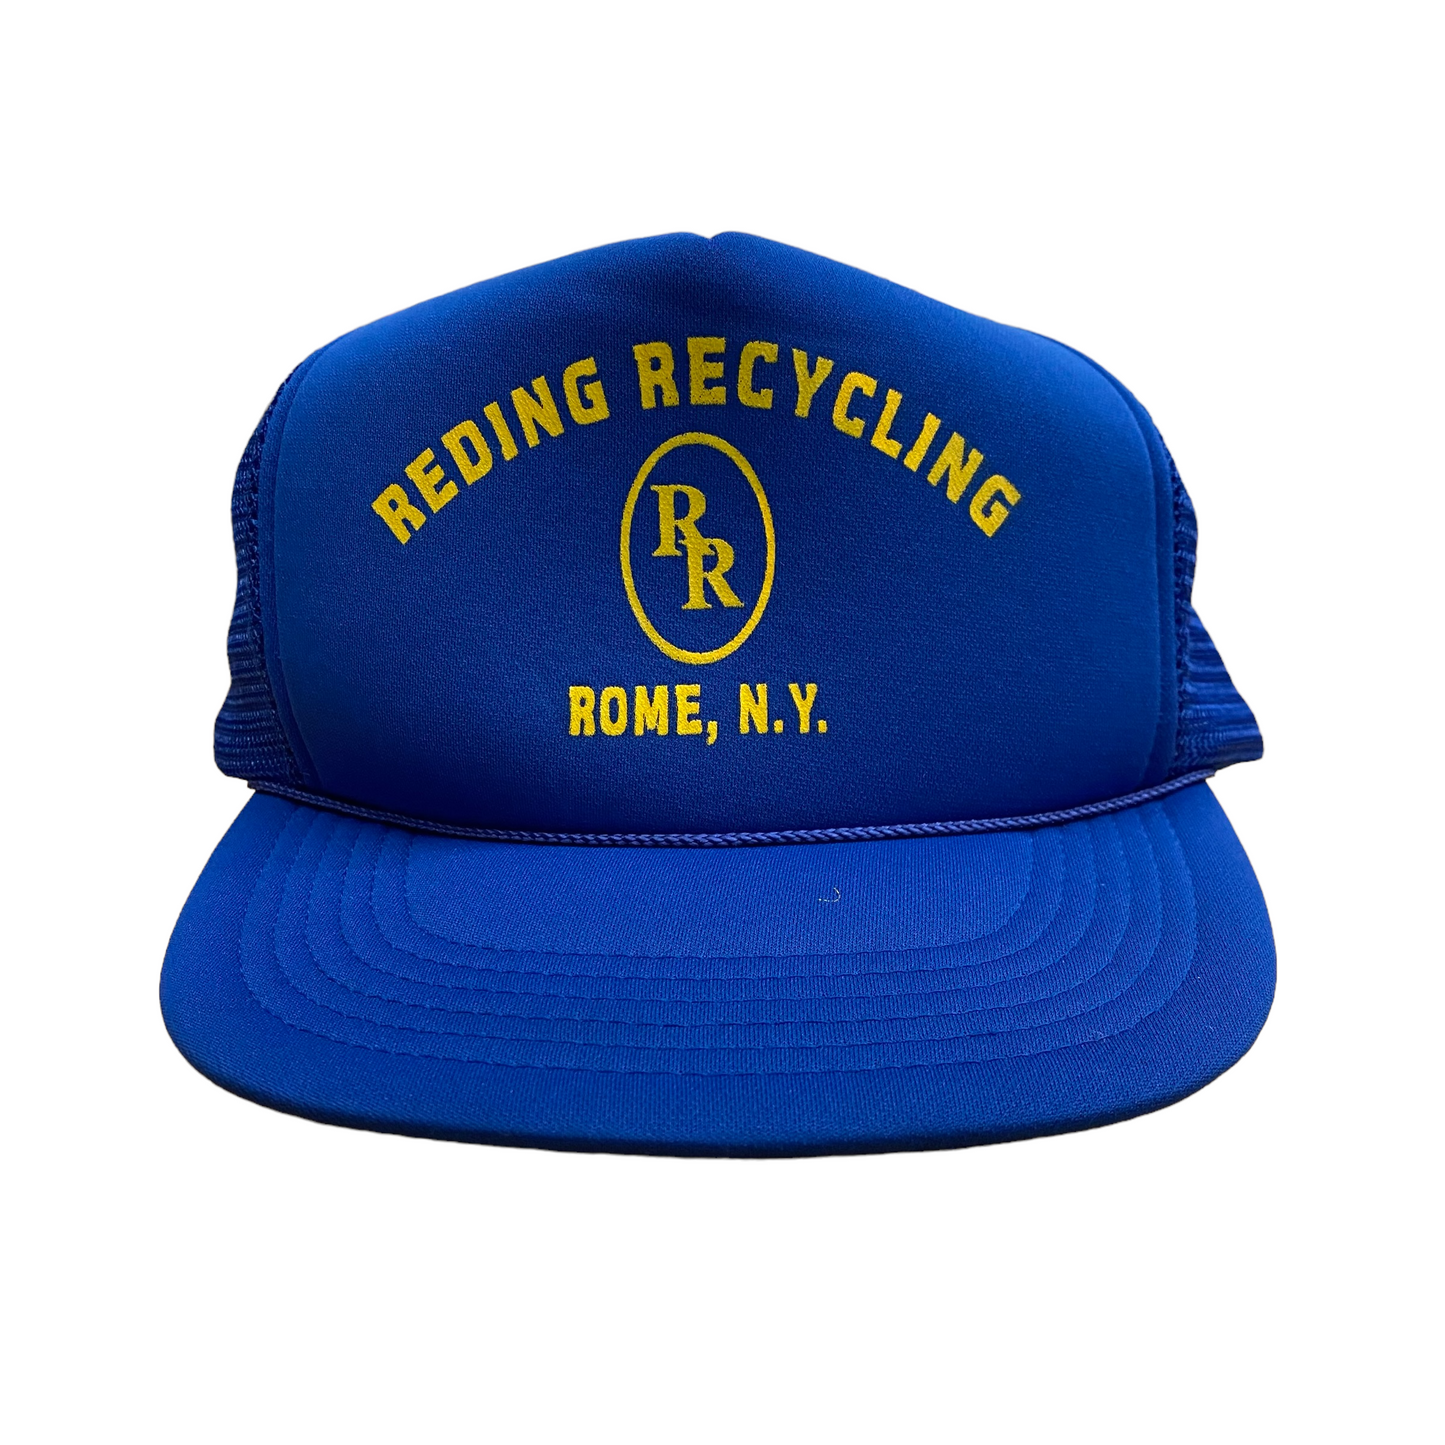 Vintage Reding Recycling Rome, NY Trucker Hat